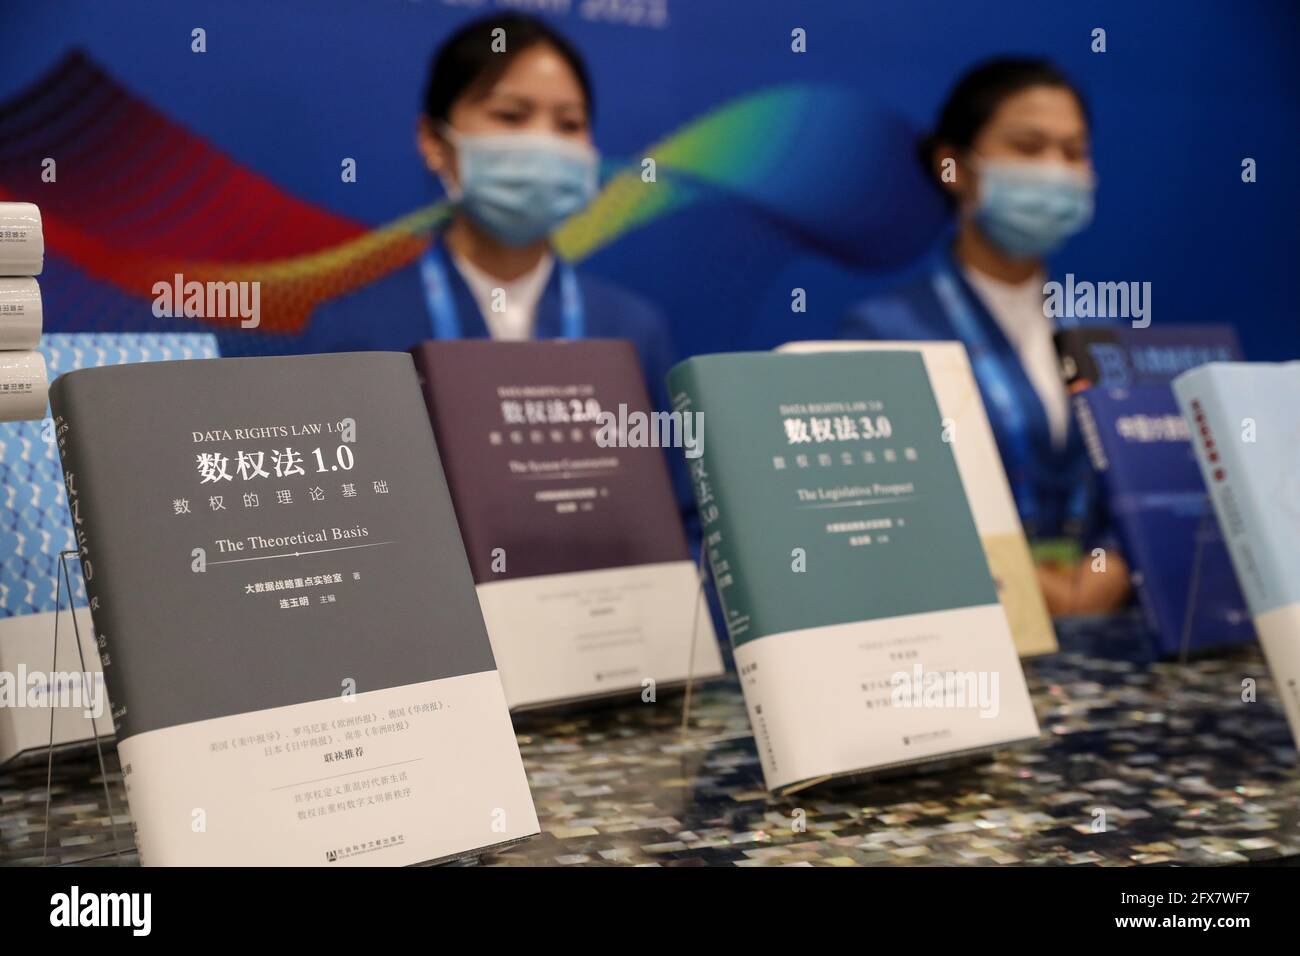 (210526) -- GUIYANG, May 26, 2021 (Xinhua) -- Data-related publications are displayed at the China International Big Data Industry Expo 2021 in Guiyang, southwest China's Guizhou Province, May 26, 2021. The China International Big Data Industry Expo 2021 opened here on Wednesday, showcasing cutting-edge scientific and technological innovations and achievements in the relevant area. Under the theme 'Embrace digital intelligence, Deliver new development,' this year's expo is scheduled both online and offline. The expo will witness six high-level dialogues to discuss topics such as data secur Stock Photo